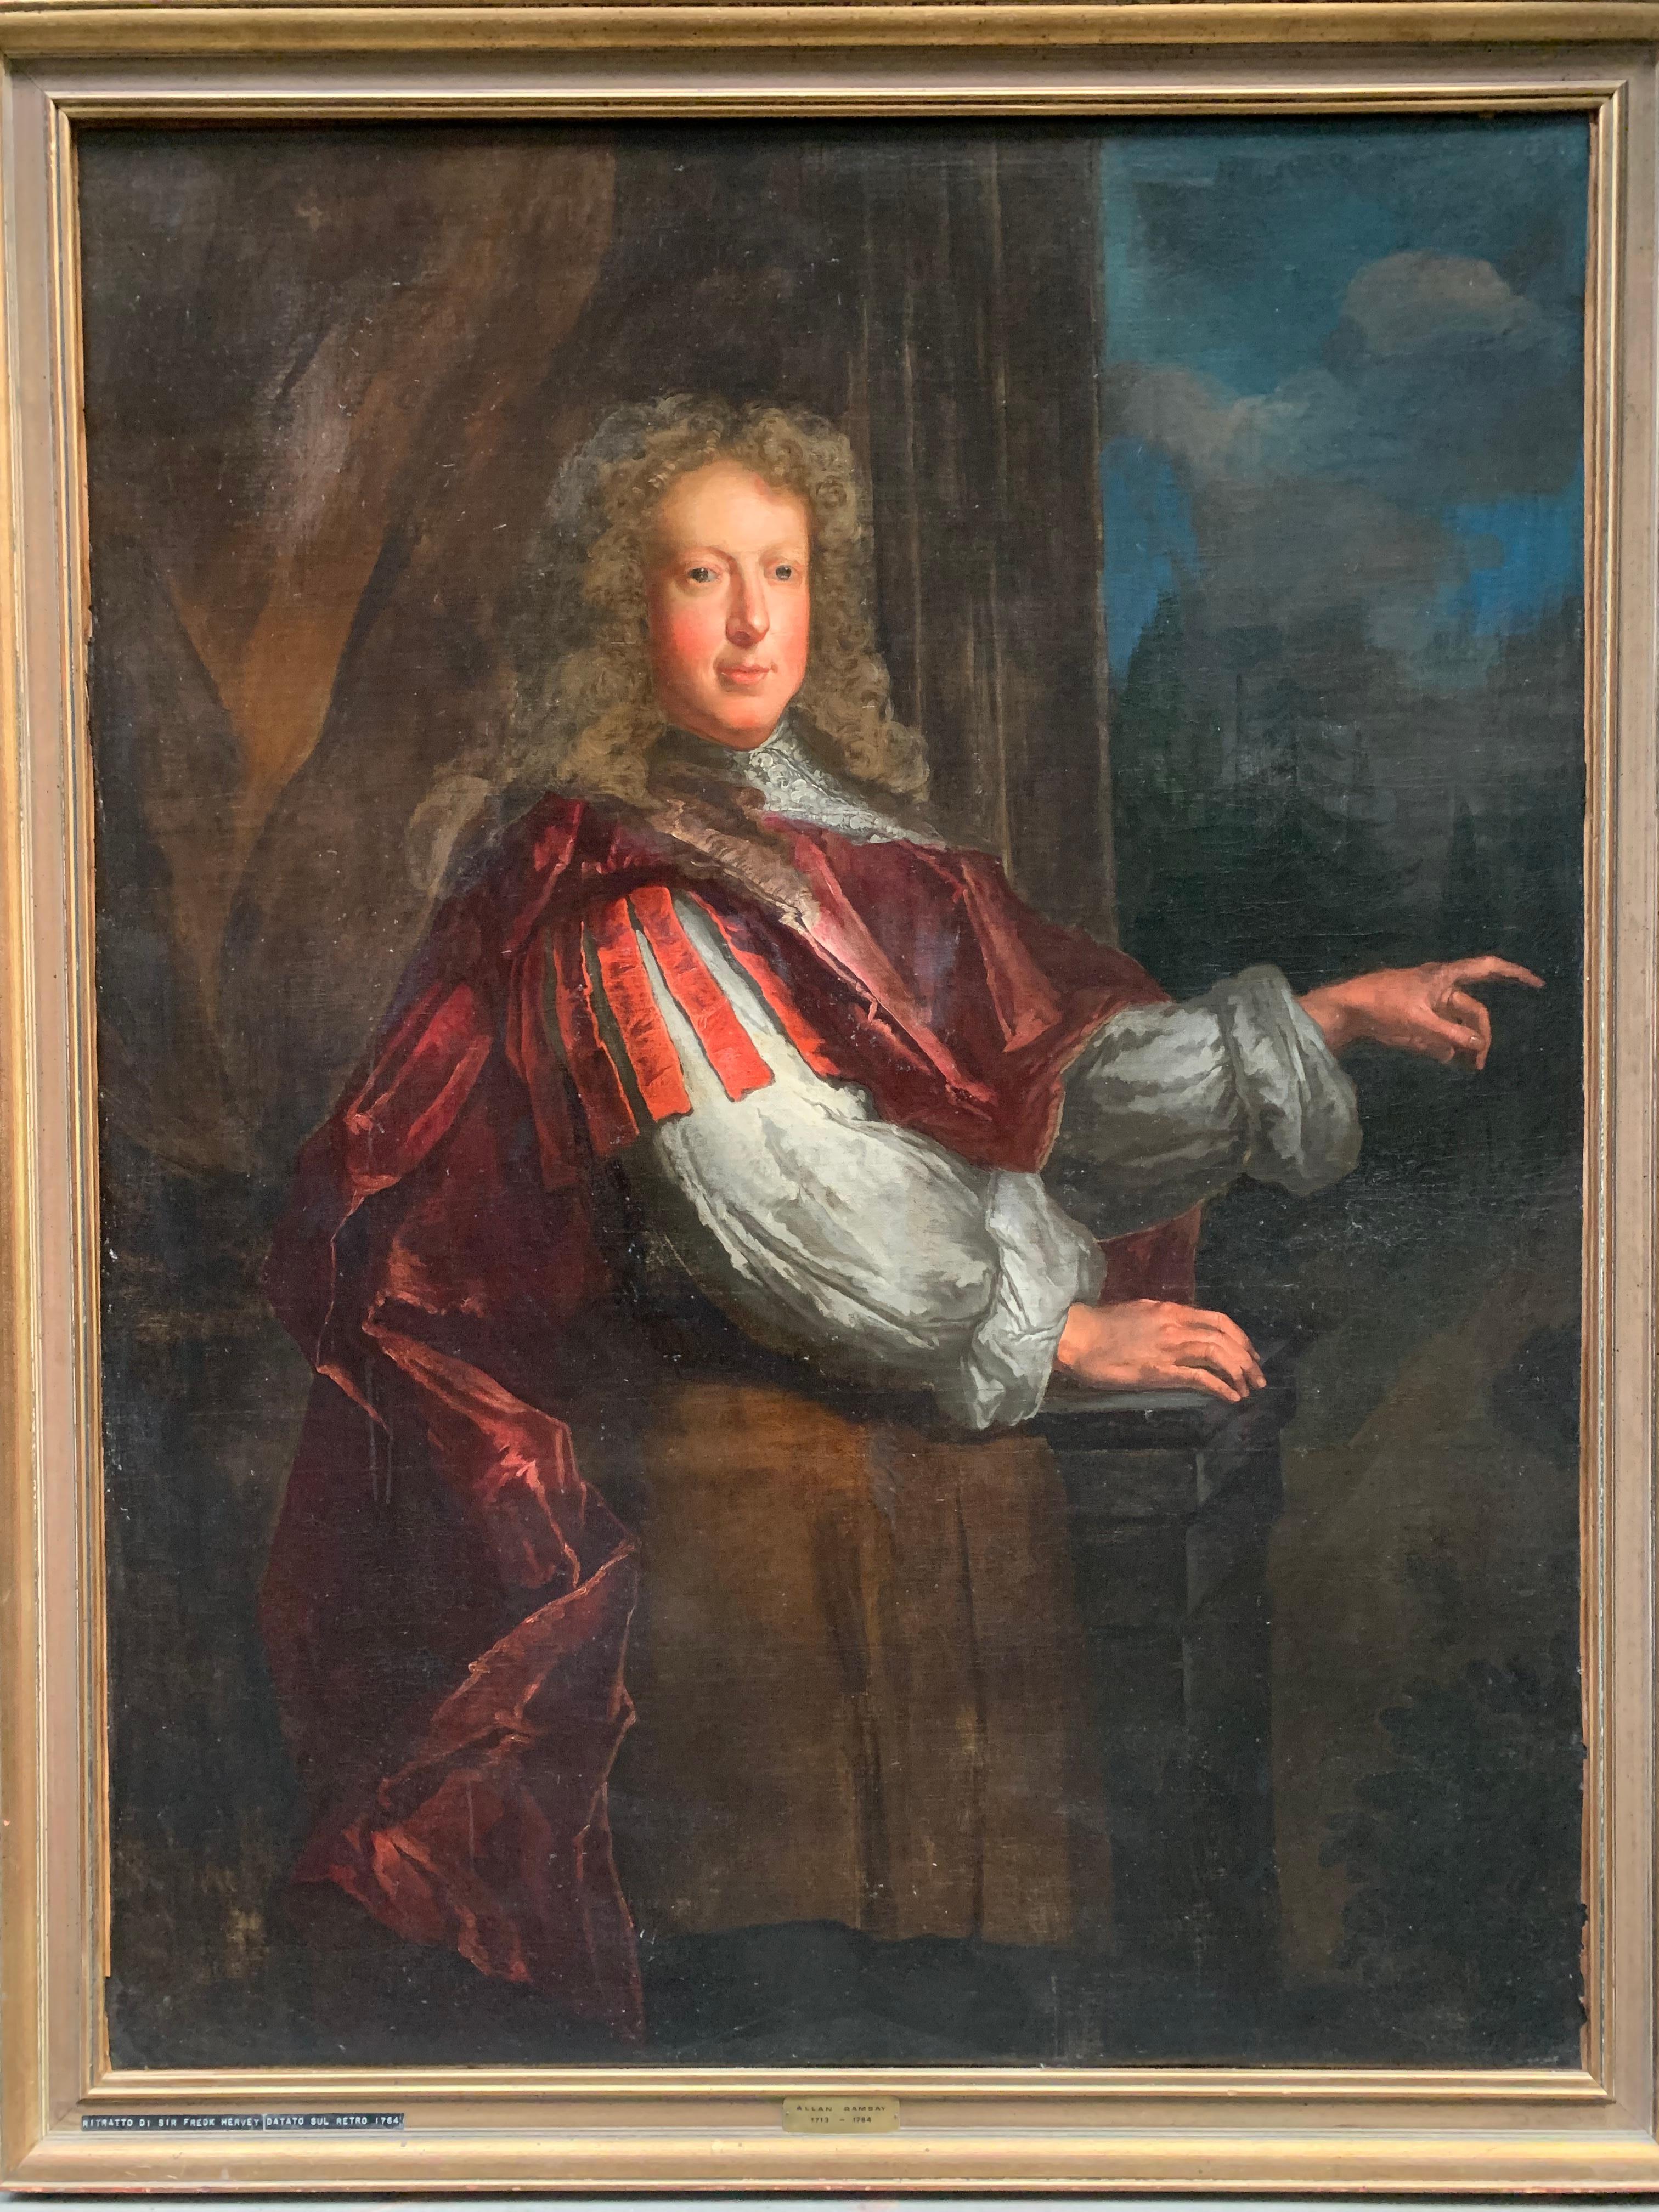 (Circle of) Godfrey Kneller Figurative Painting - John Hervey Portrait on occasion of receiving the Title 1st Earl of Bristol